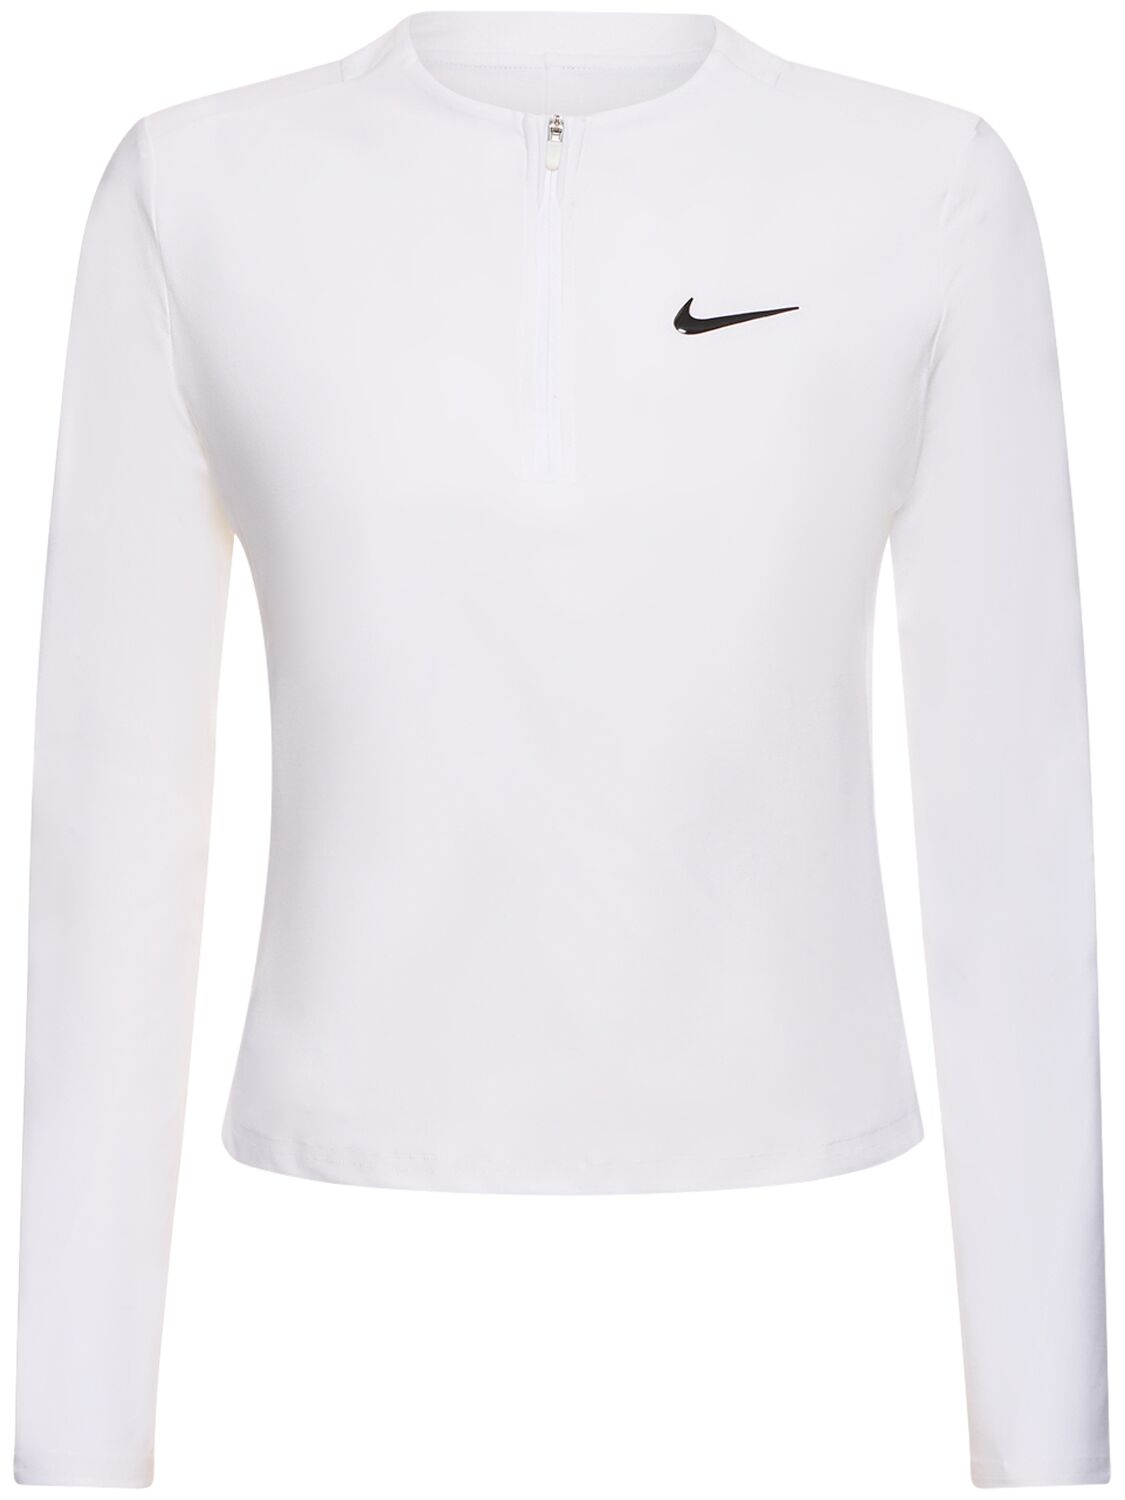 Image of Dri-fit Long Sleeve Top